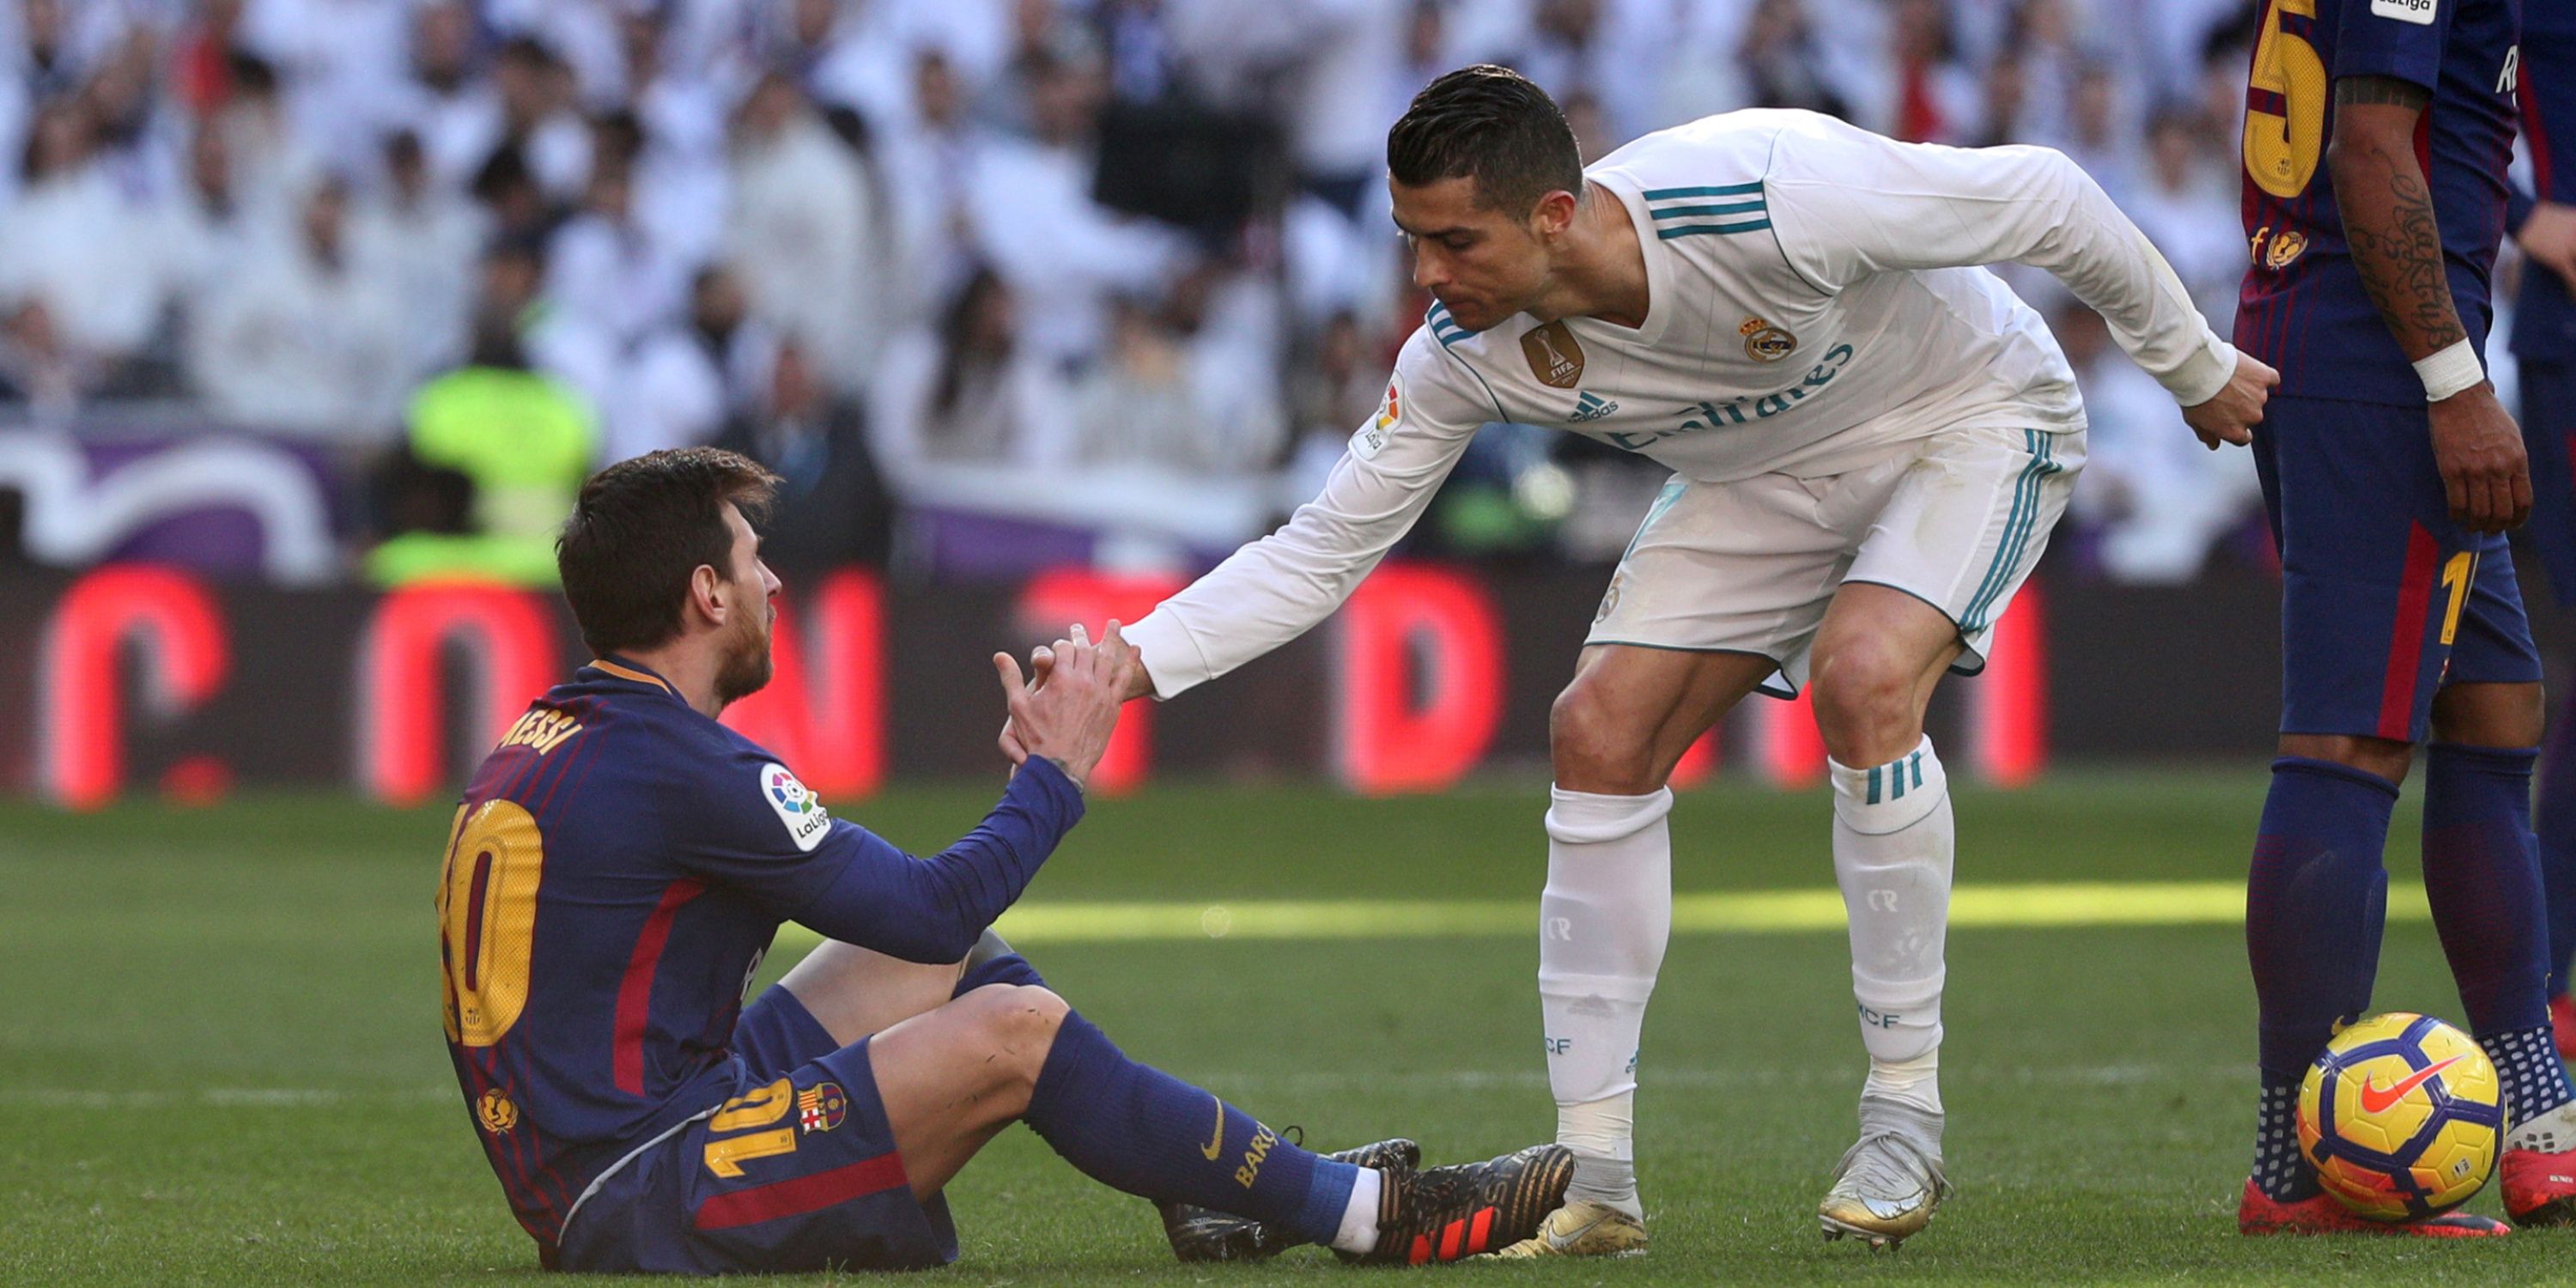 Cristiano Ronaldo helping Lionel Messi off the ground during a match between Barcelona and Real Madrid